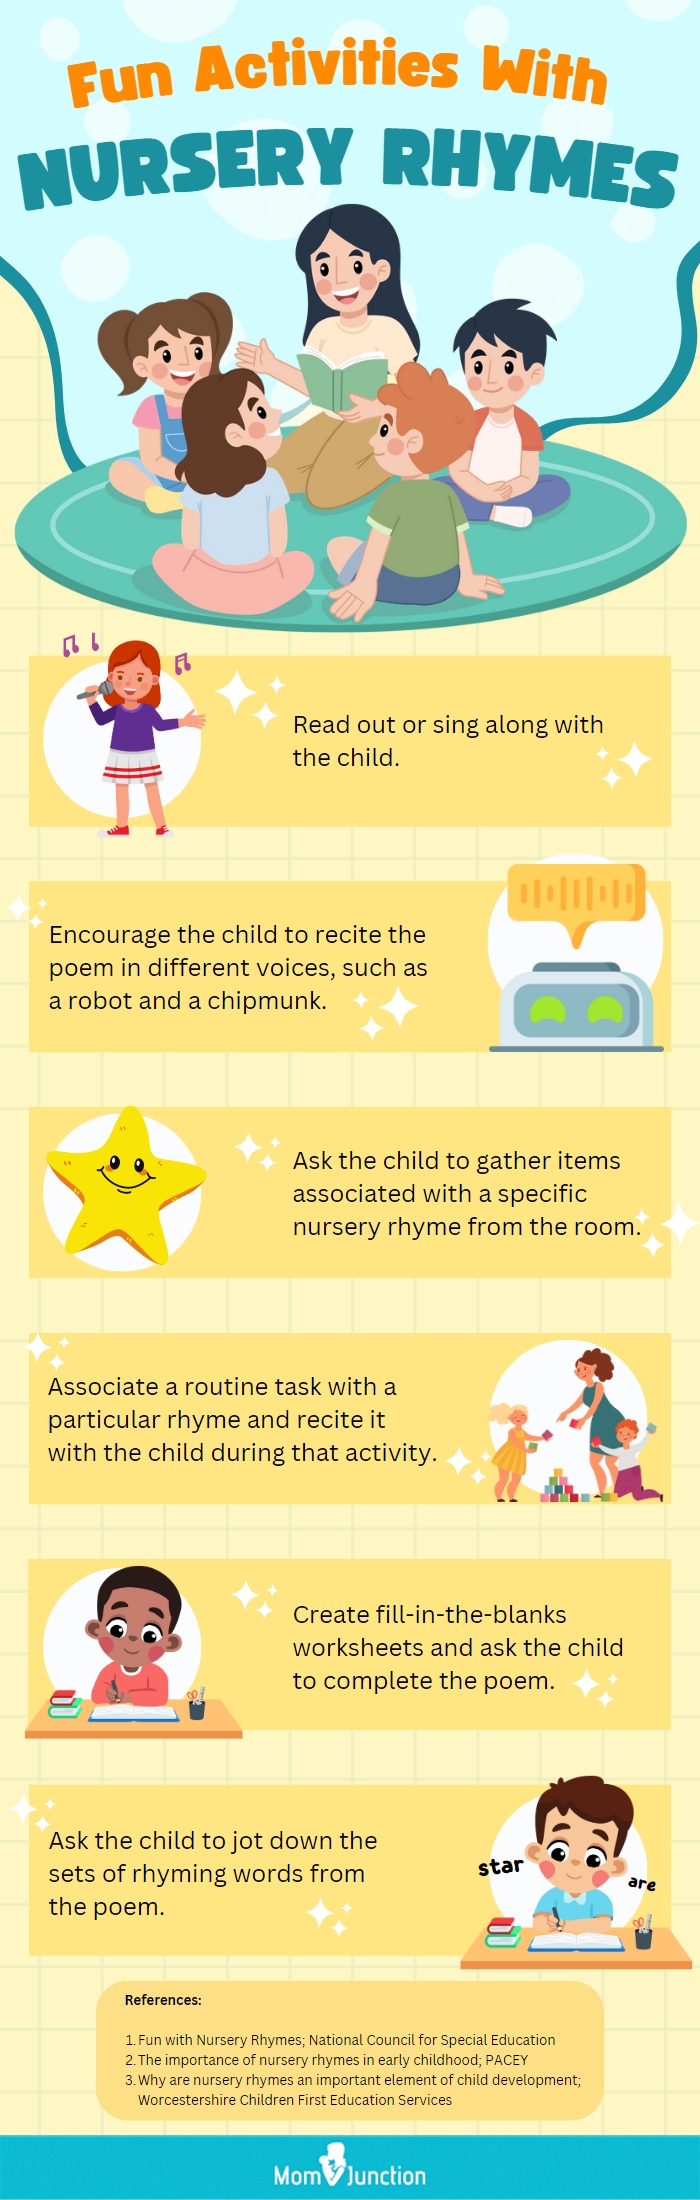 Fun Activities With Nursery Rhymes 348 Content topics (Infographic)